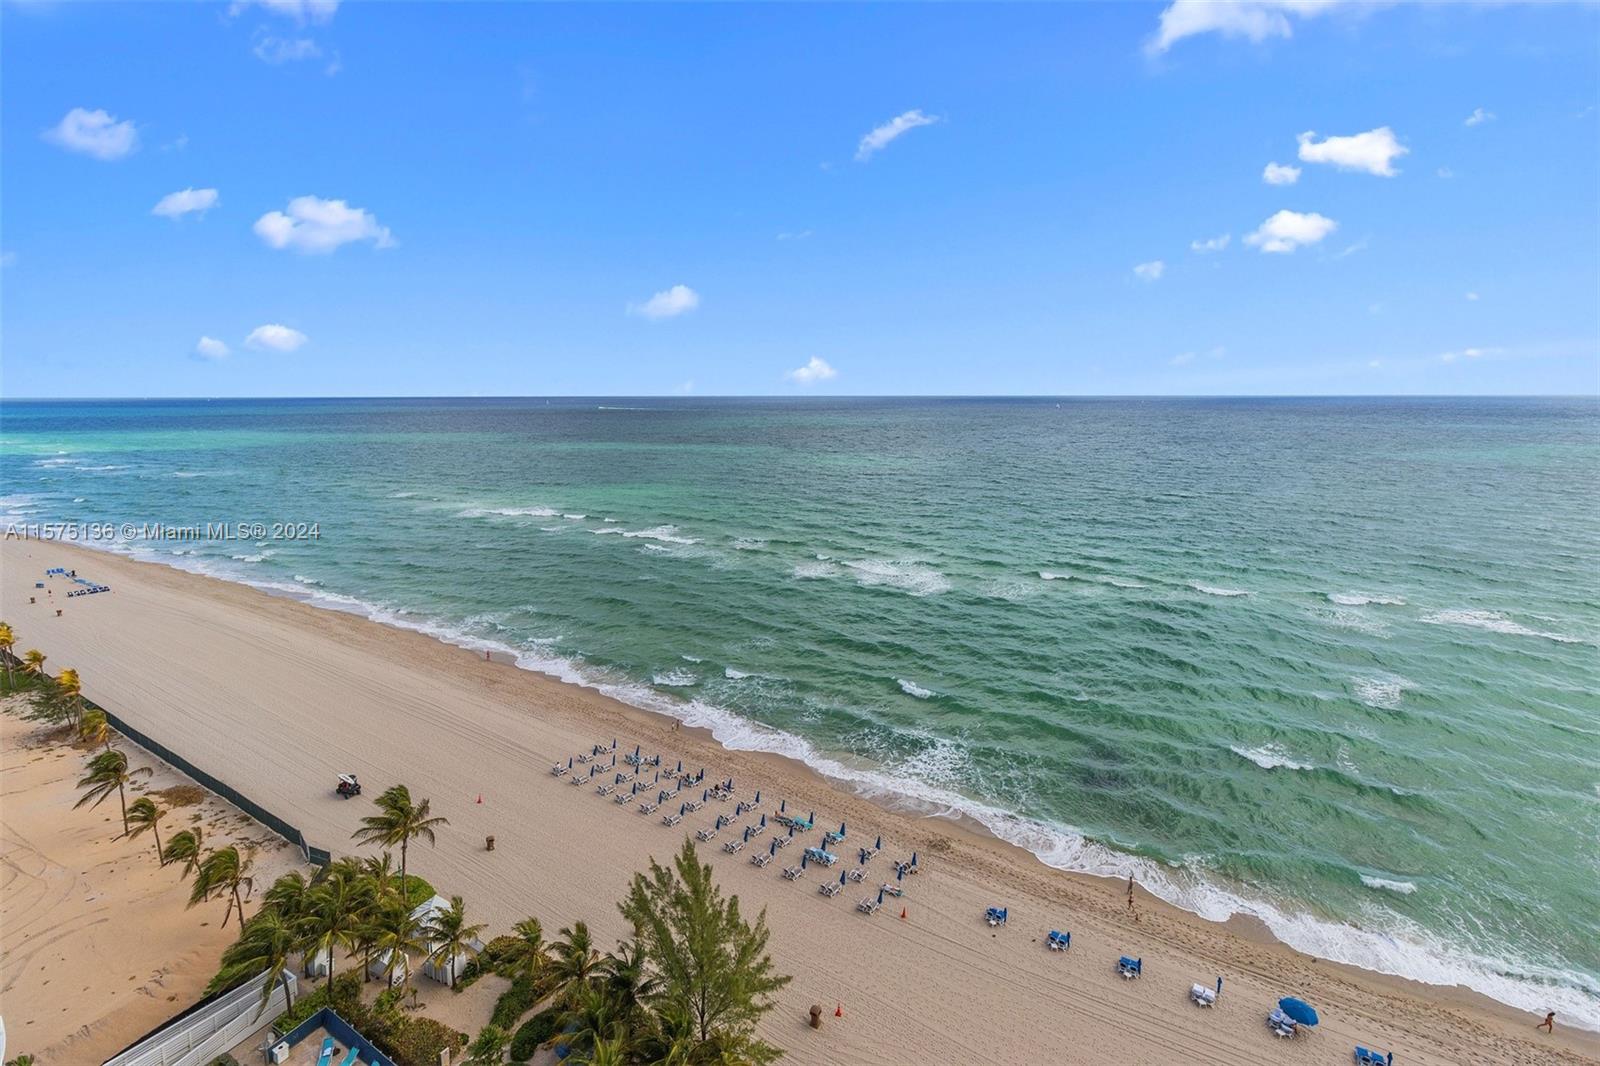 Millennium Condo / Sunny Isles Beach / 3 Beds + Den /3.5 Baths / 2,210 sq. ft. of living area / Large open balcony / Direct ocean views / Marble floors / The den can be used as an additional bedroom / Private elevator takes you directly into your foyer / 2 assigned parking spaces / Building features; heated poll with Jacuzzi, two story gym, sauna, tennis court, towel and chair services on the beach and much more!